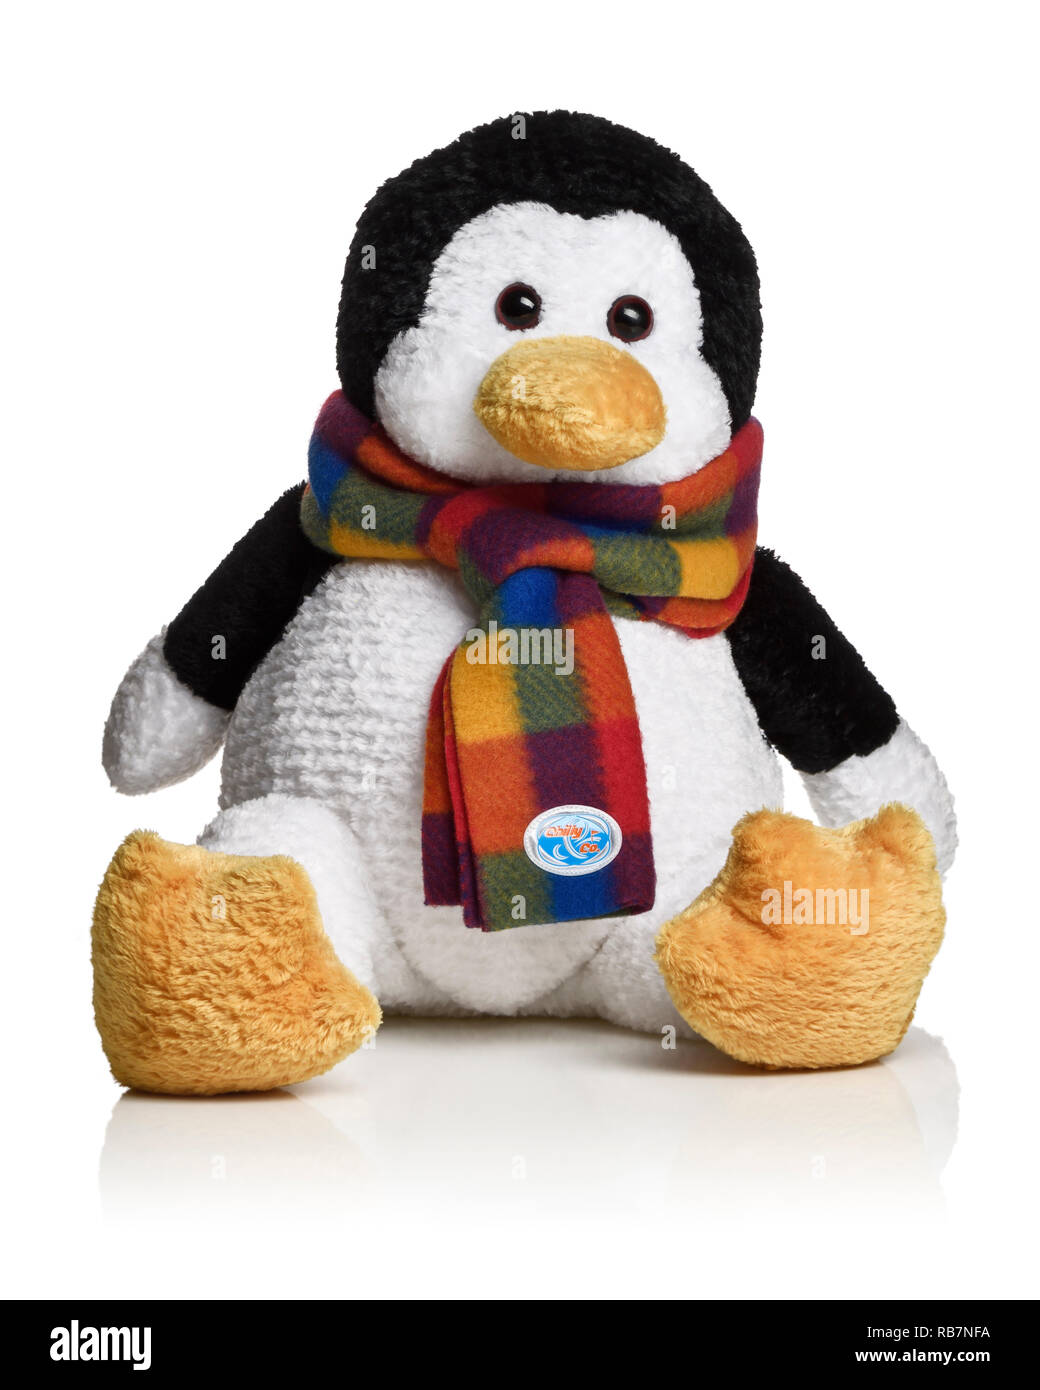 Cuddly penguin toy wearing a scarf Stock Photo